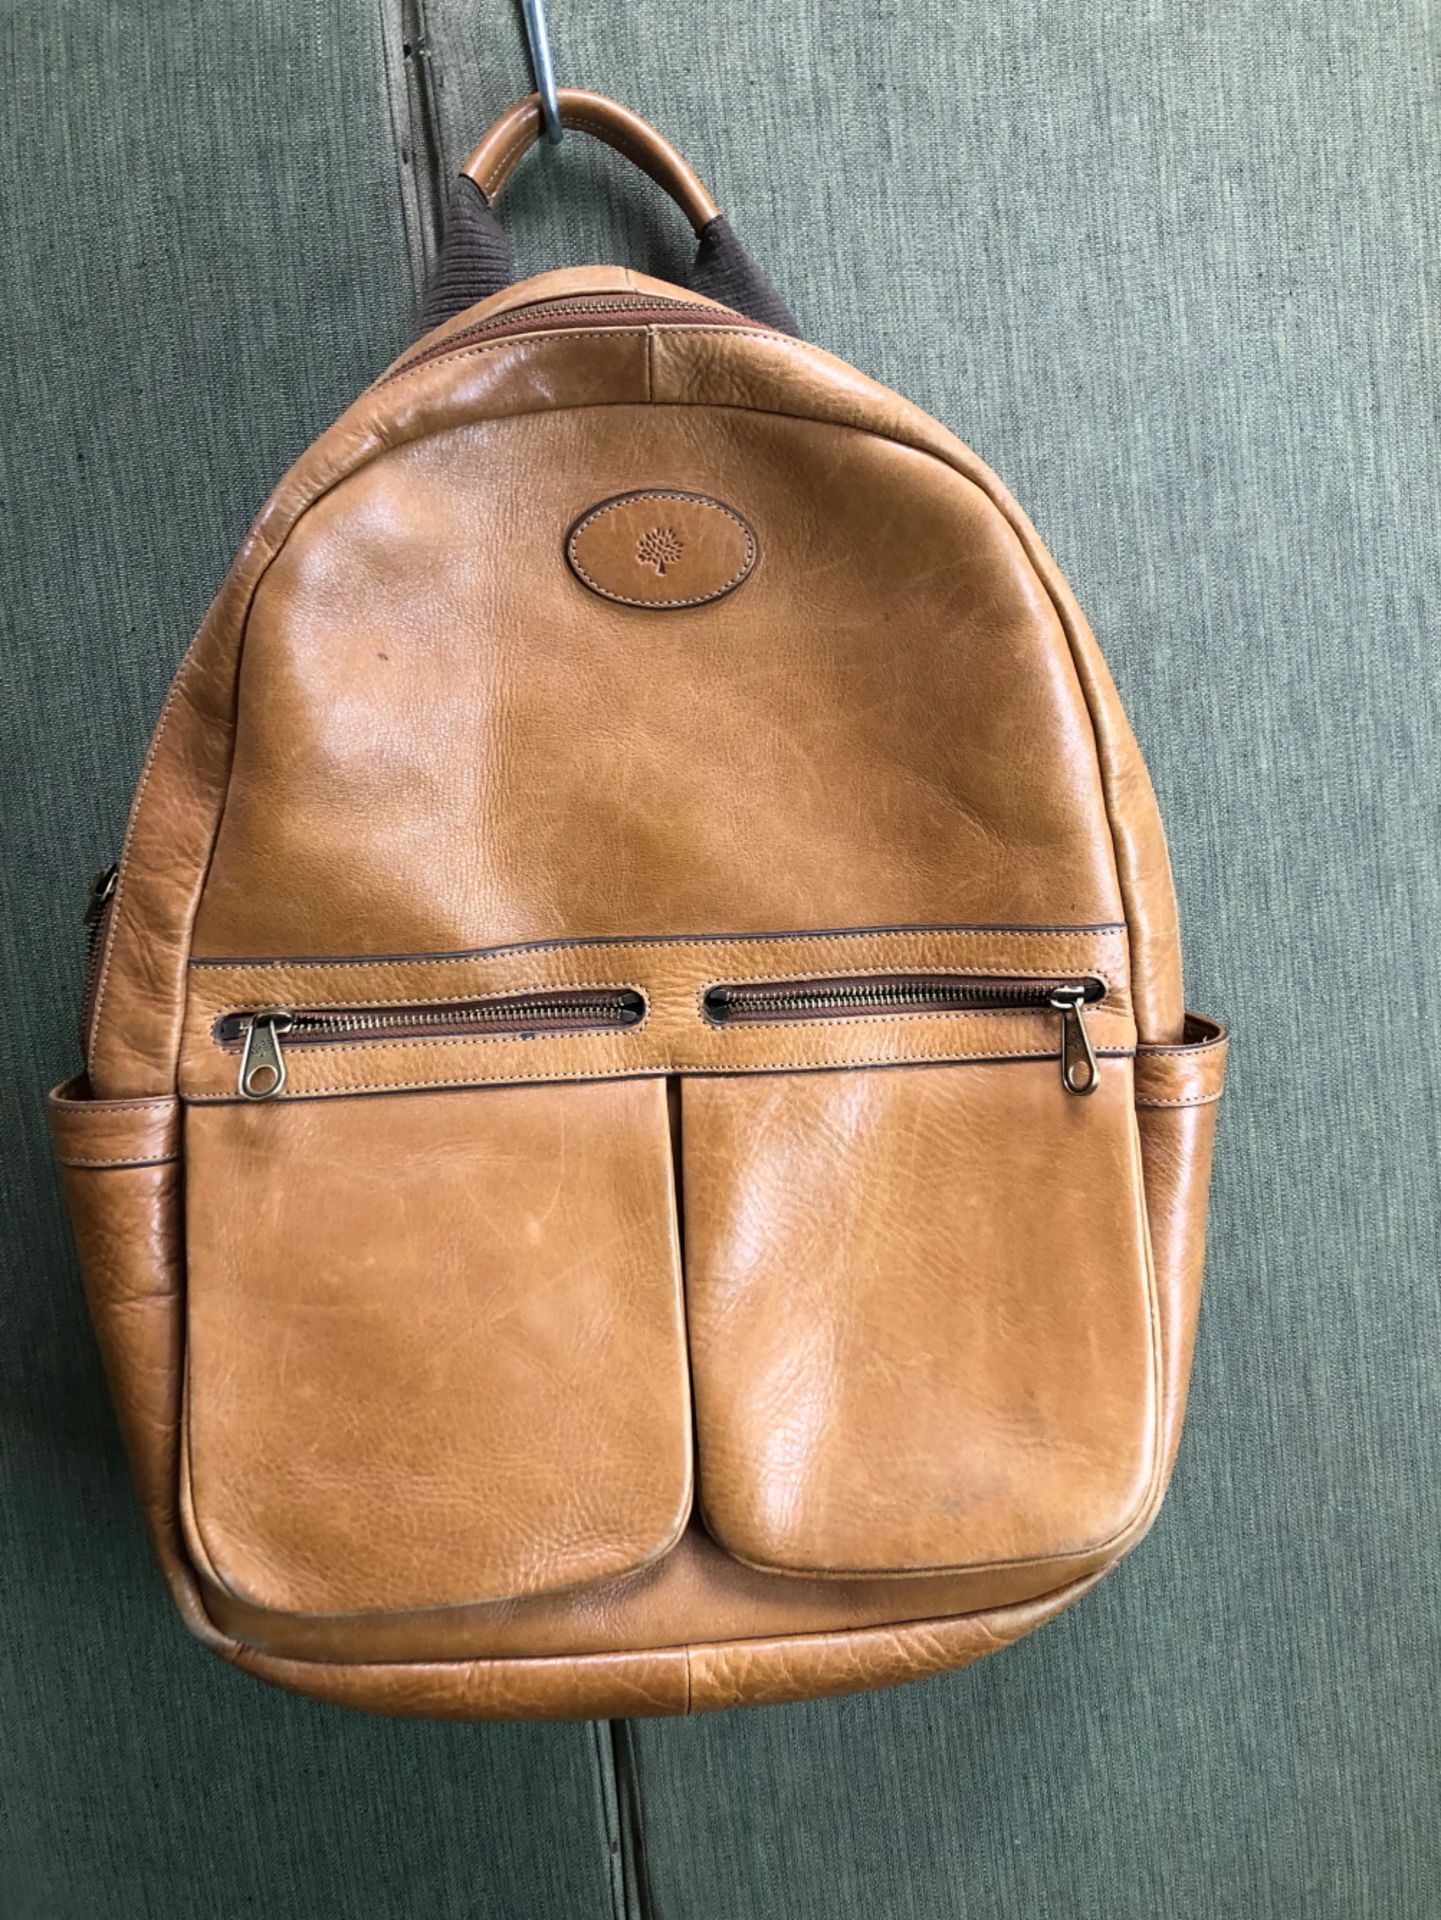 A LARGE BROWN MULBERRY BACKPACK HEIGHT 45cm WIDTH 41cm.